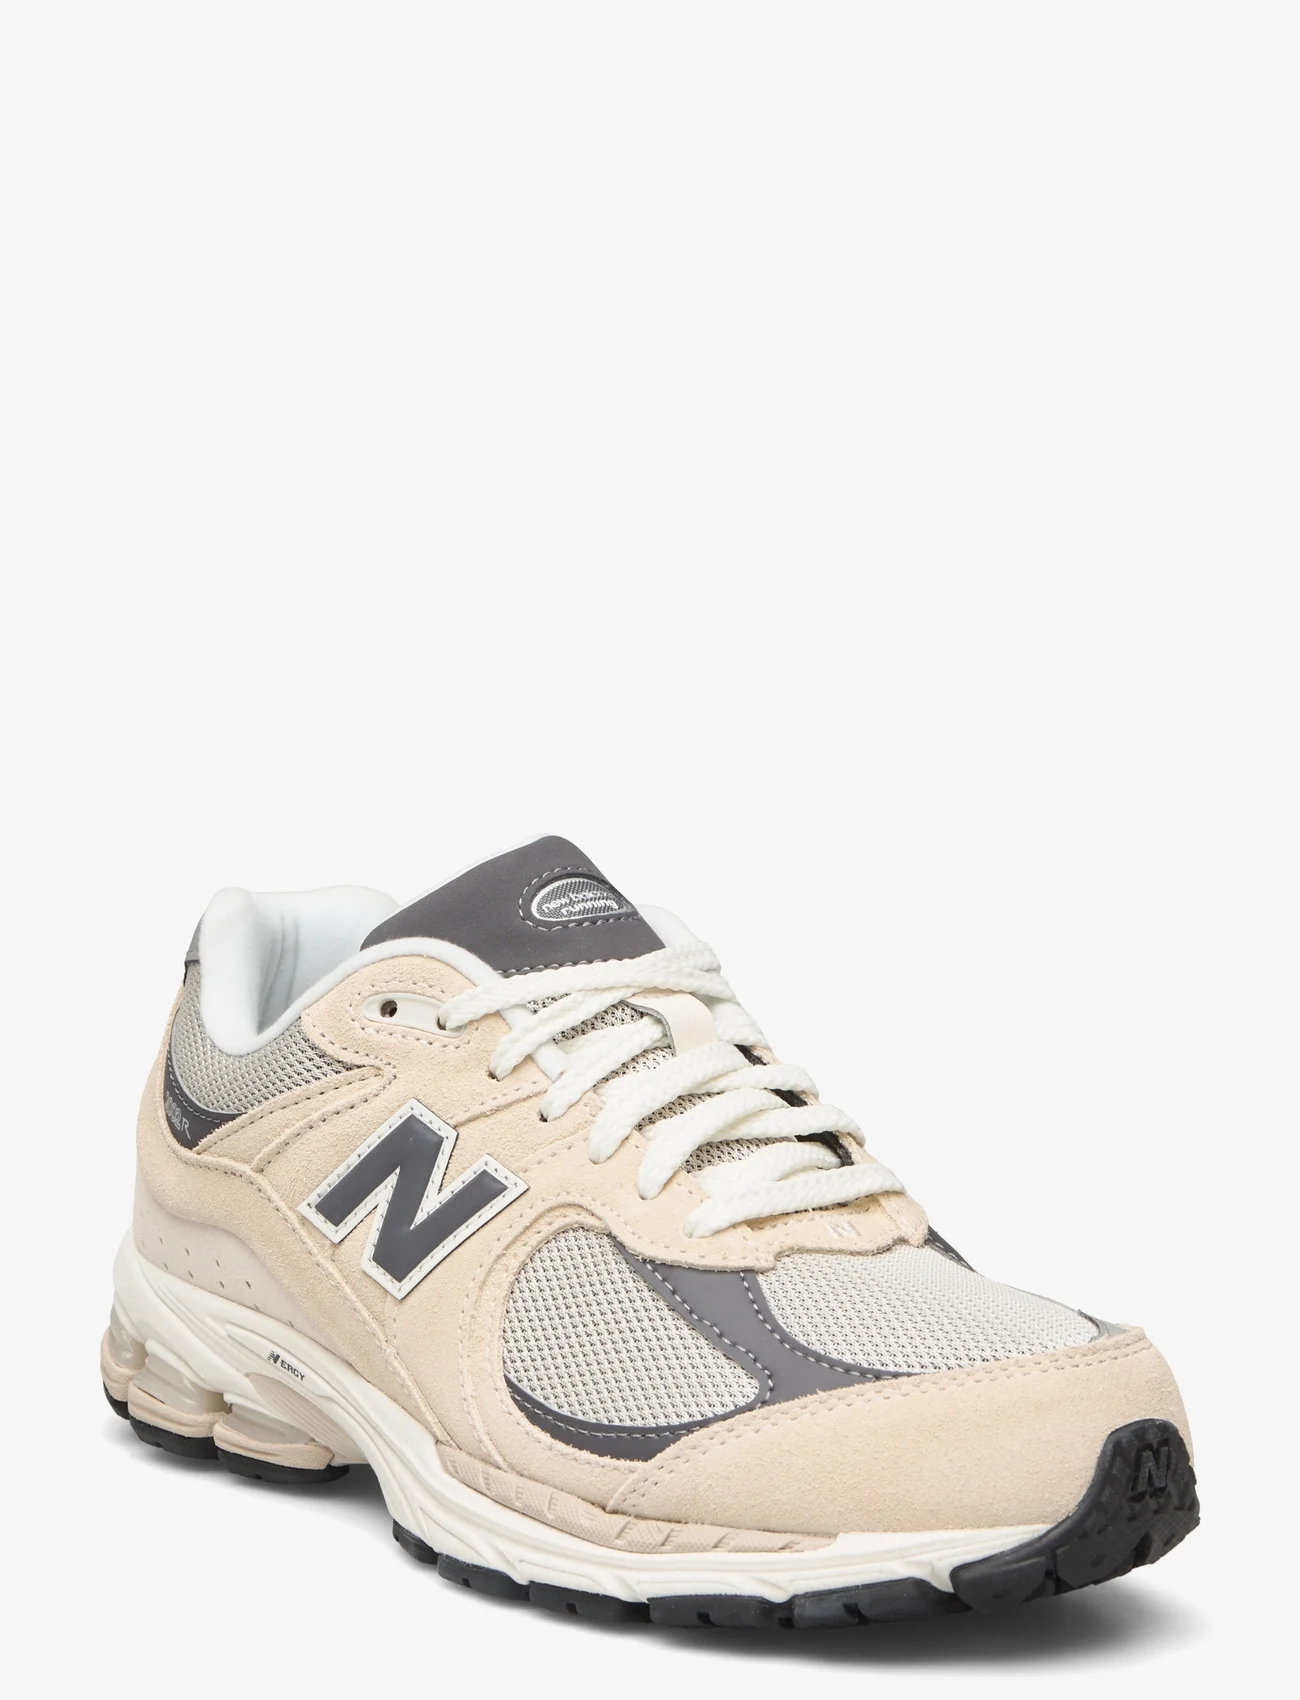 New Balance - New Balance 2002R - lave sneakers - sandstone - 0